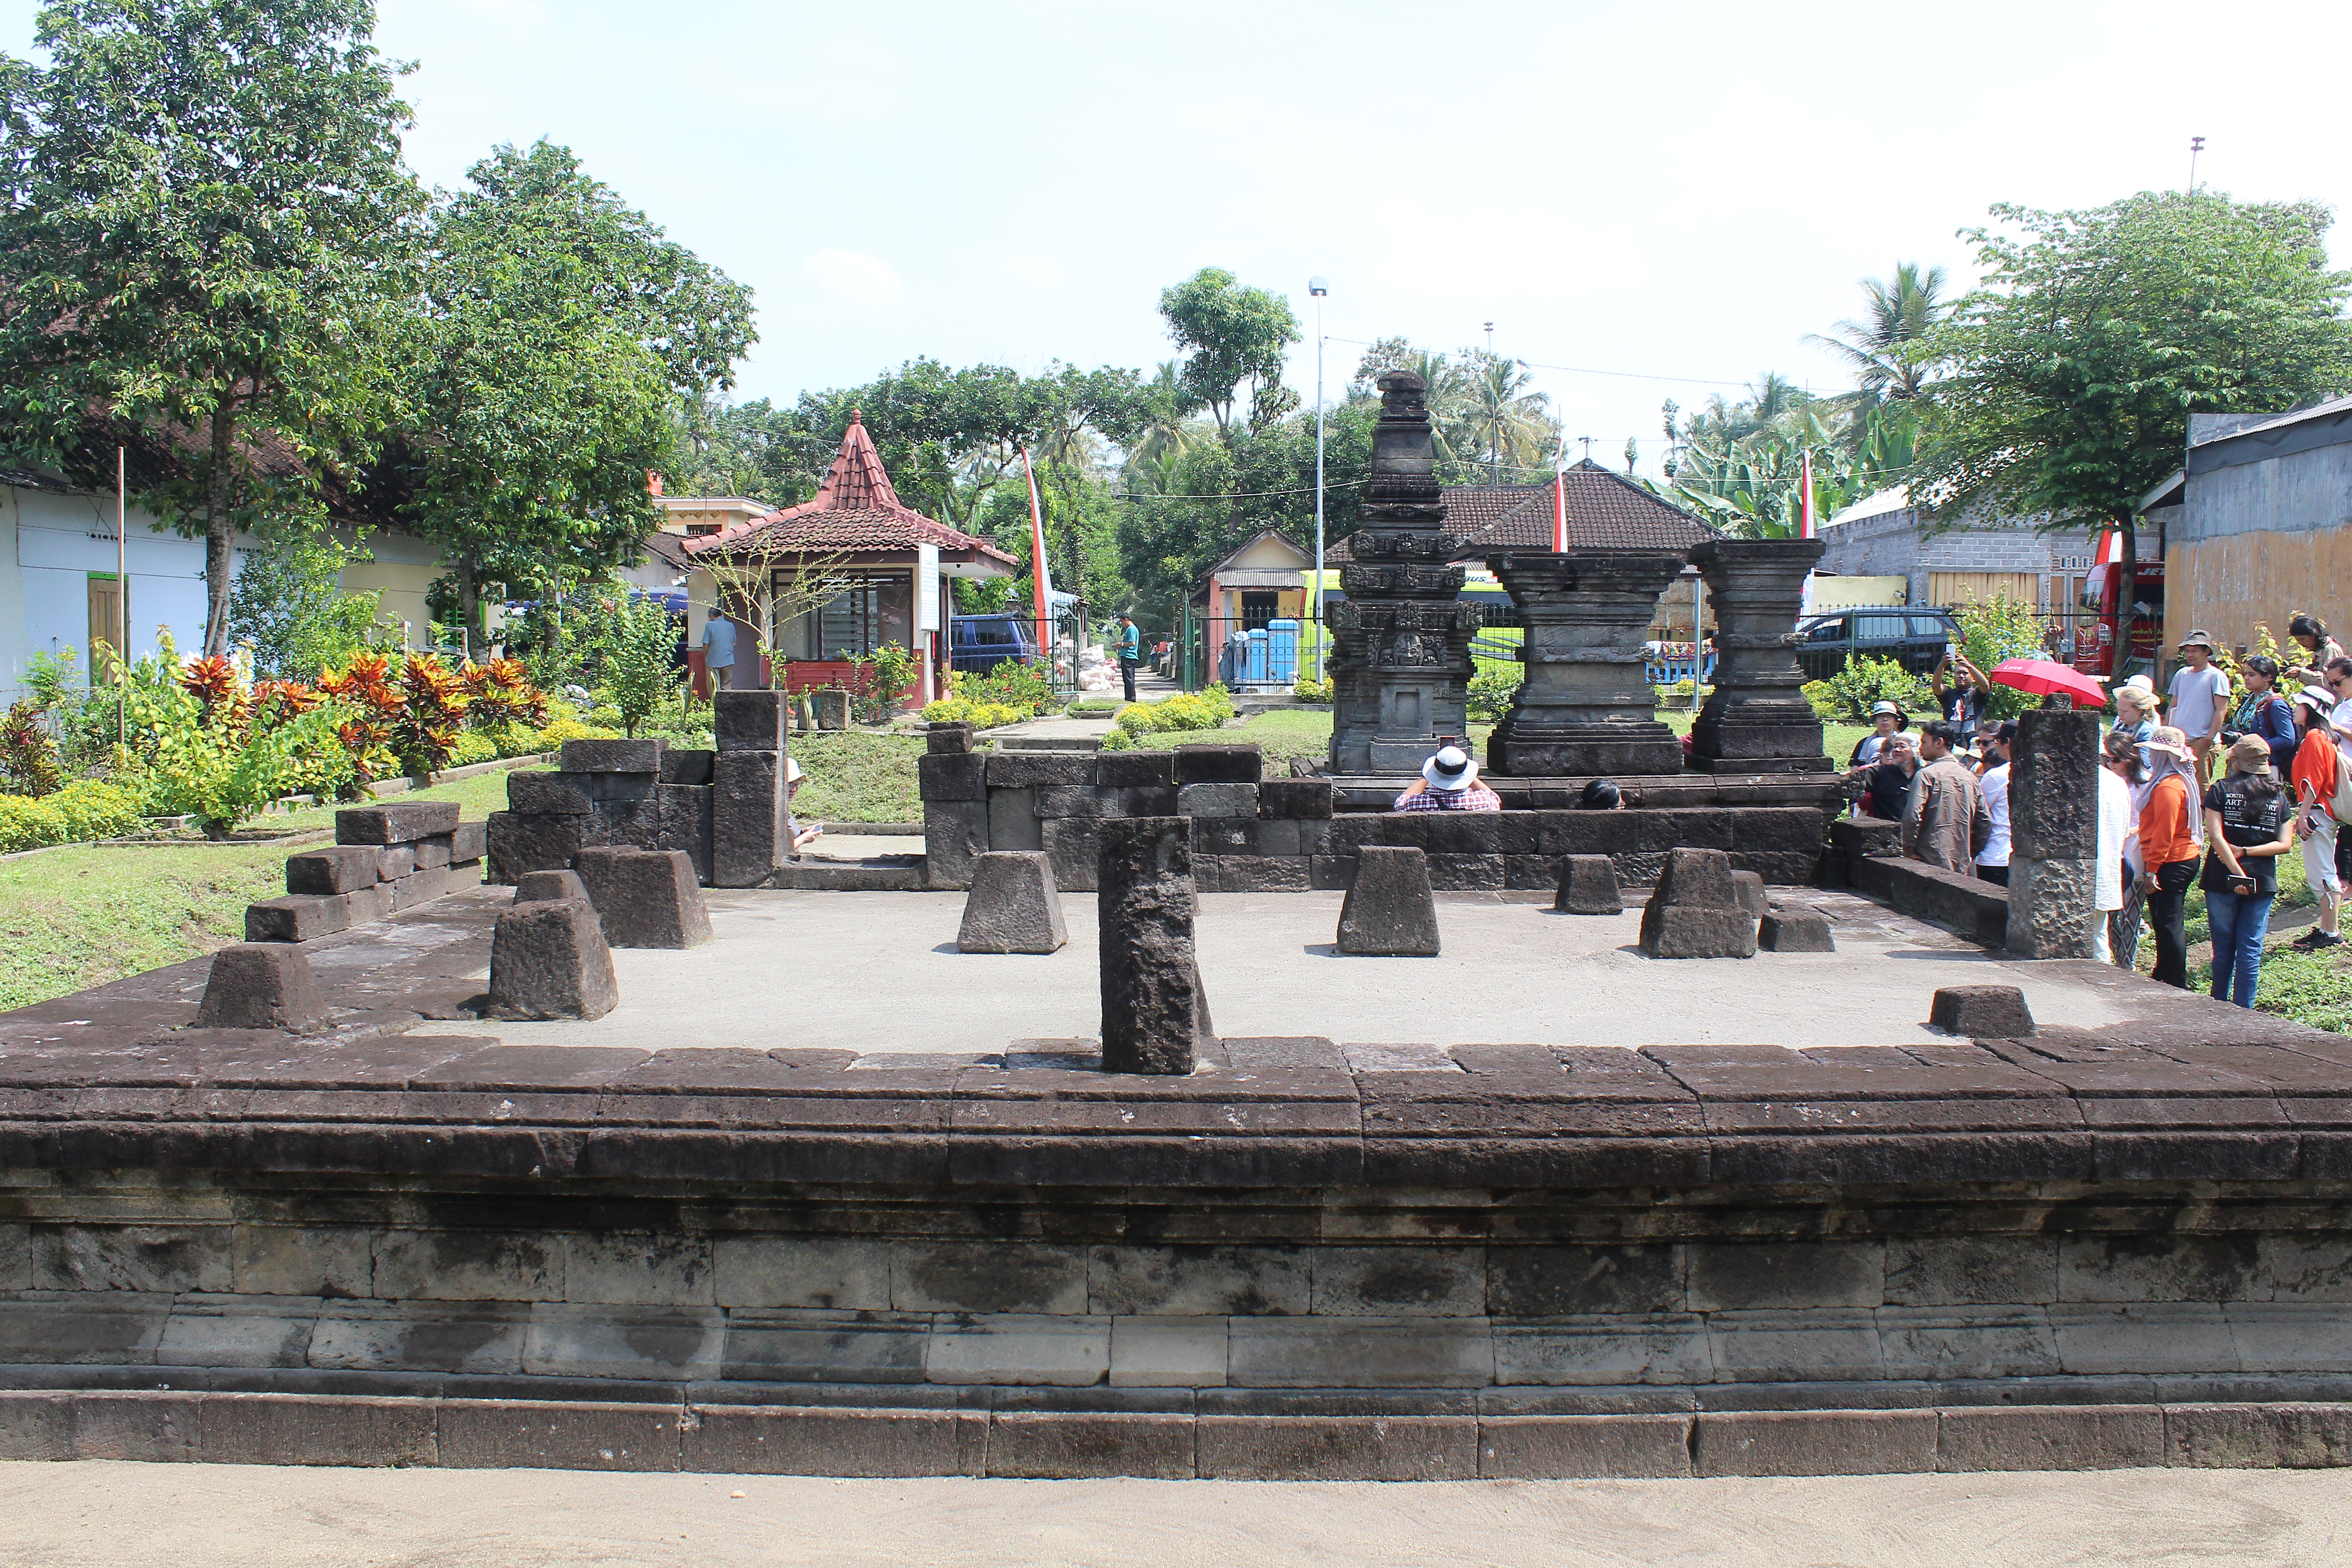 Sparsely remaining temple with cluster of people to the right